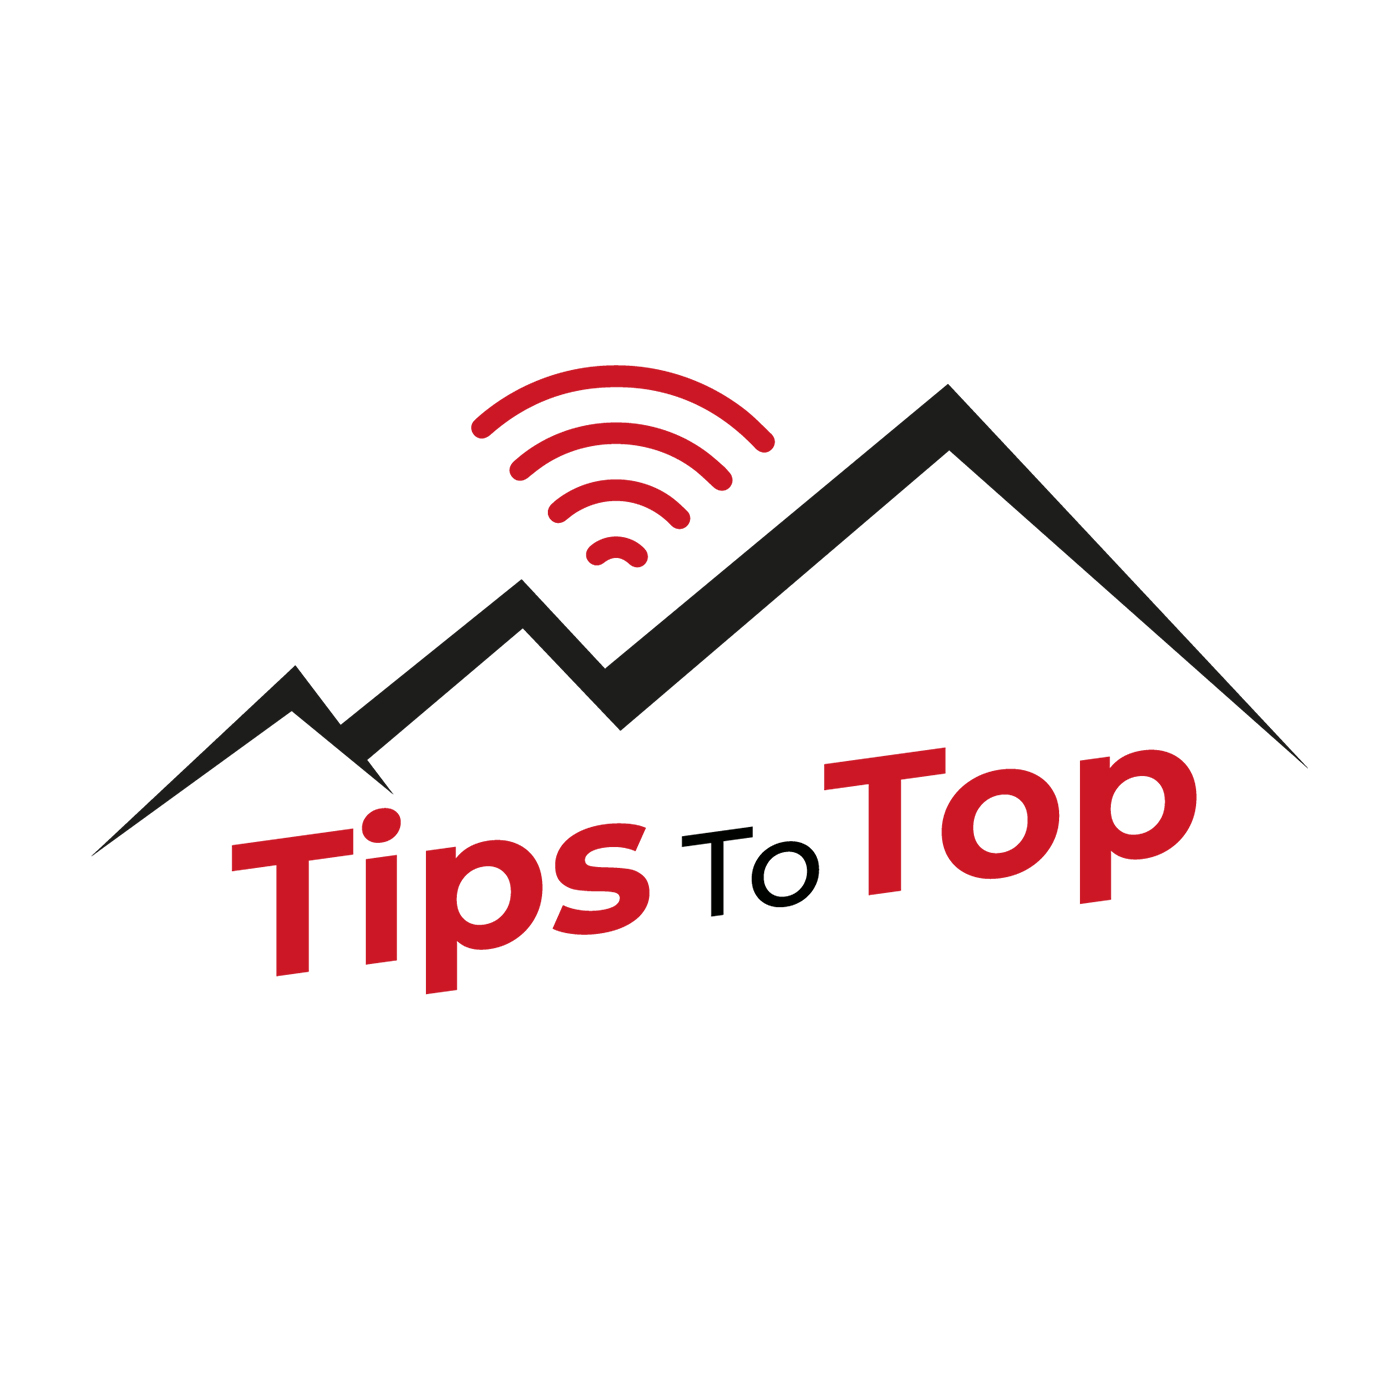 Tips To Top